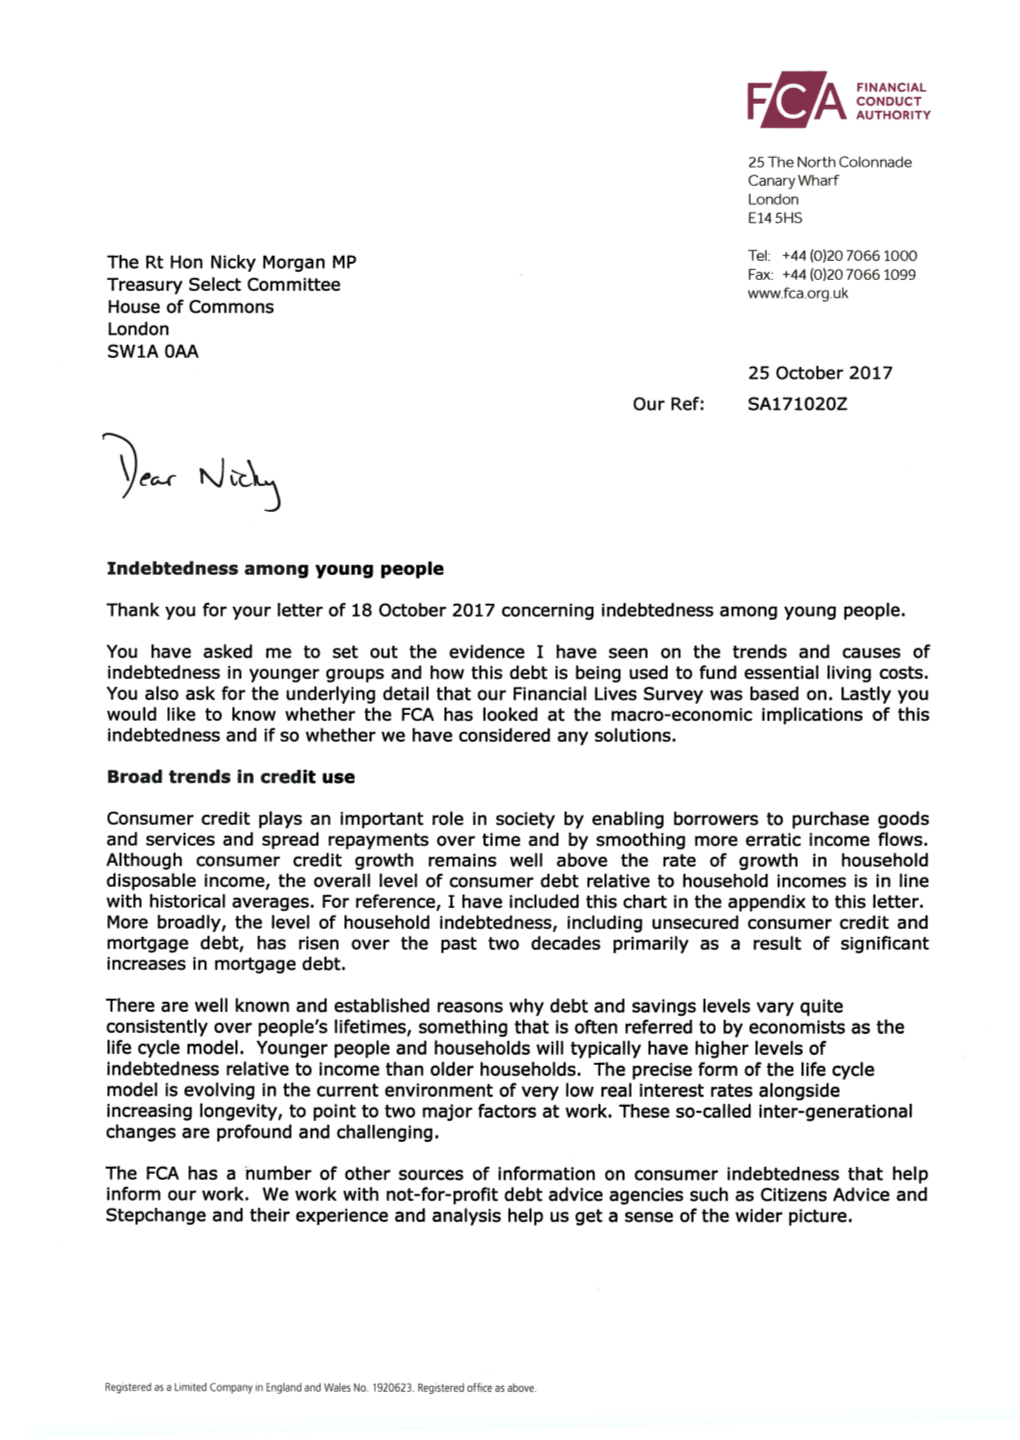 Correspondence from the Chief Executive of the Financial Conduct Authority Relating to Indebtedness in Young People, Dated 25 Oc